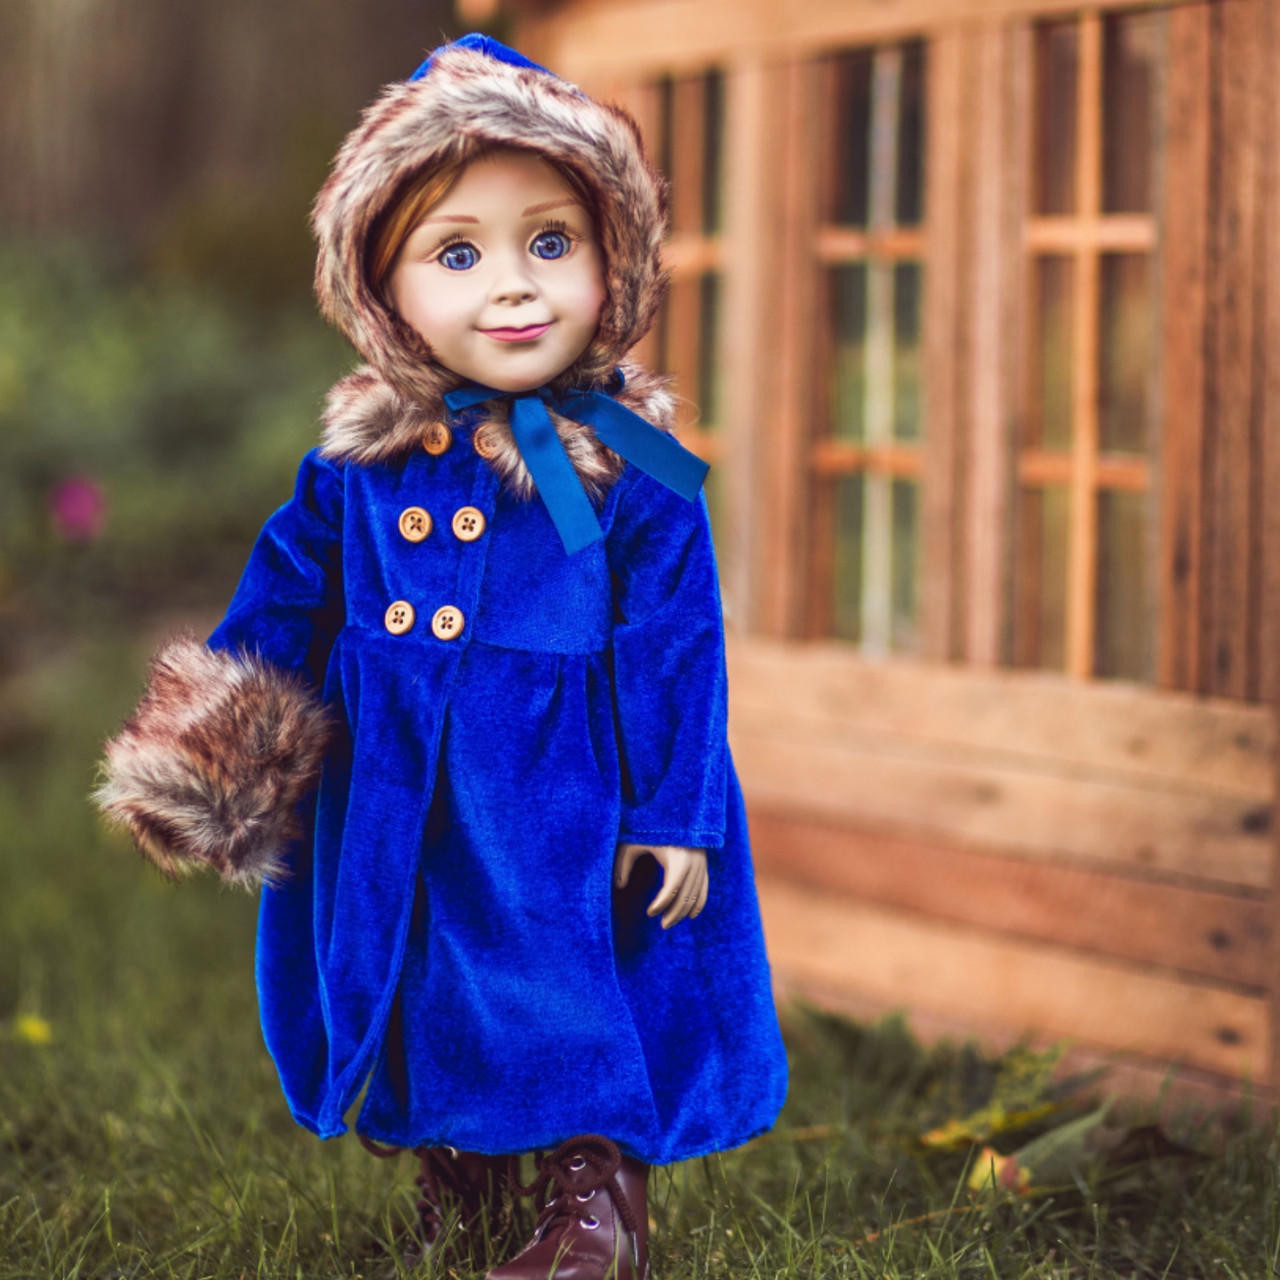 https://cdn11.bigcommerce.com/s-m5vcu70215/images/stencil/1280w/products/141/2601/the-queens-treasures-1800s-velvet-winter-fur-trimmed-coat-for-18-inch-dolls__01446.1692298505.jpg